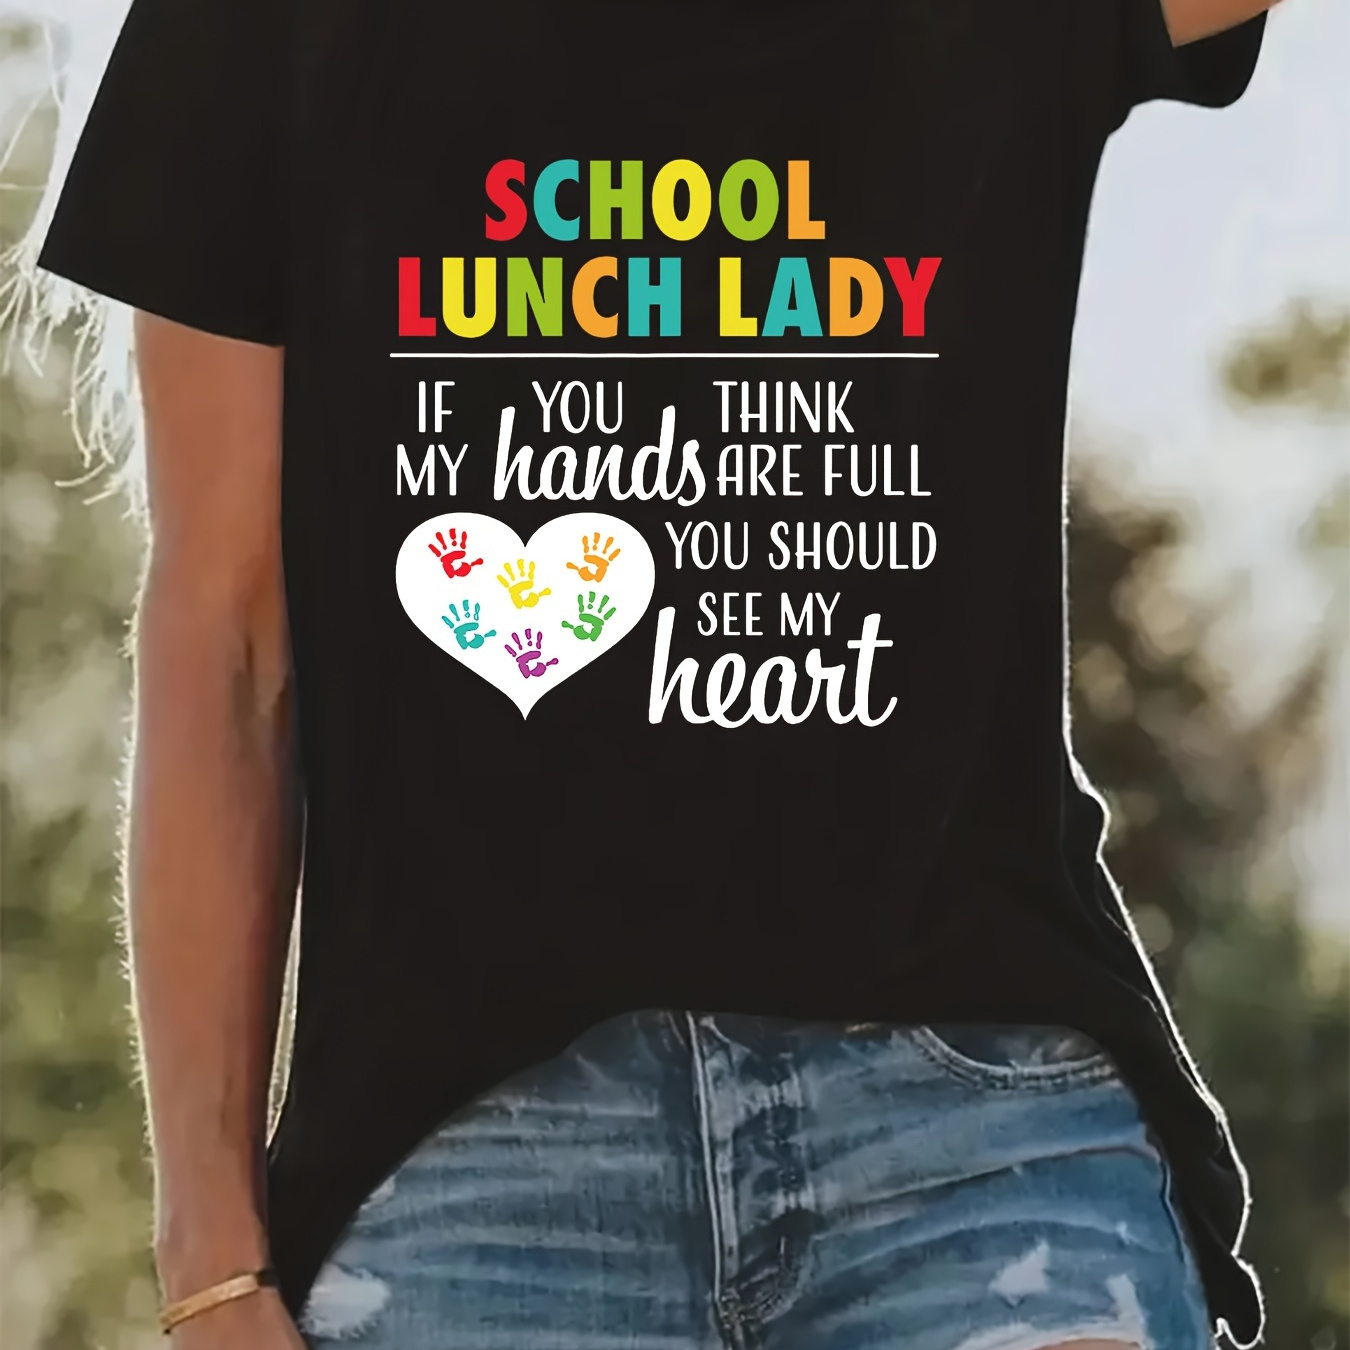 

School Lunch Lady Print T-shirt, Short Sleeve Crew Neck Casual Top For Summer & Spring, Women's Clothing